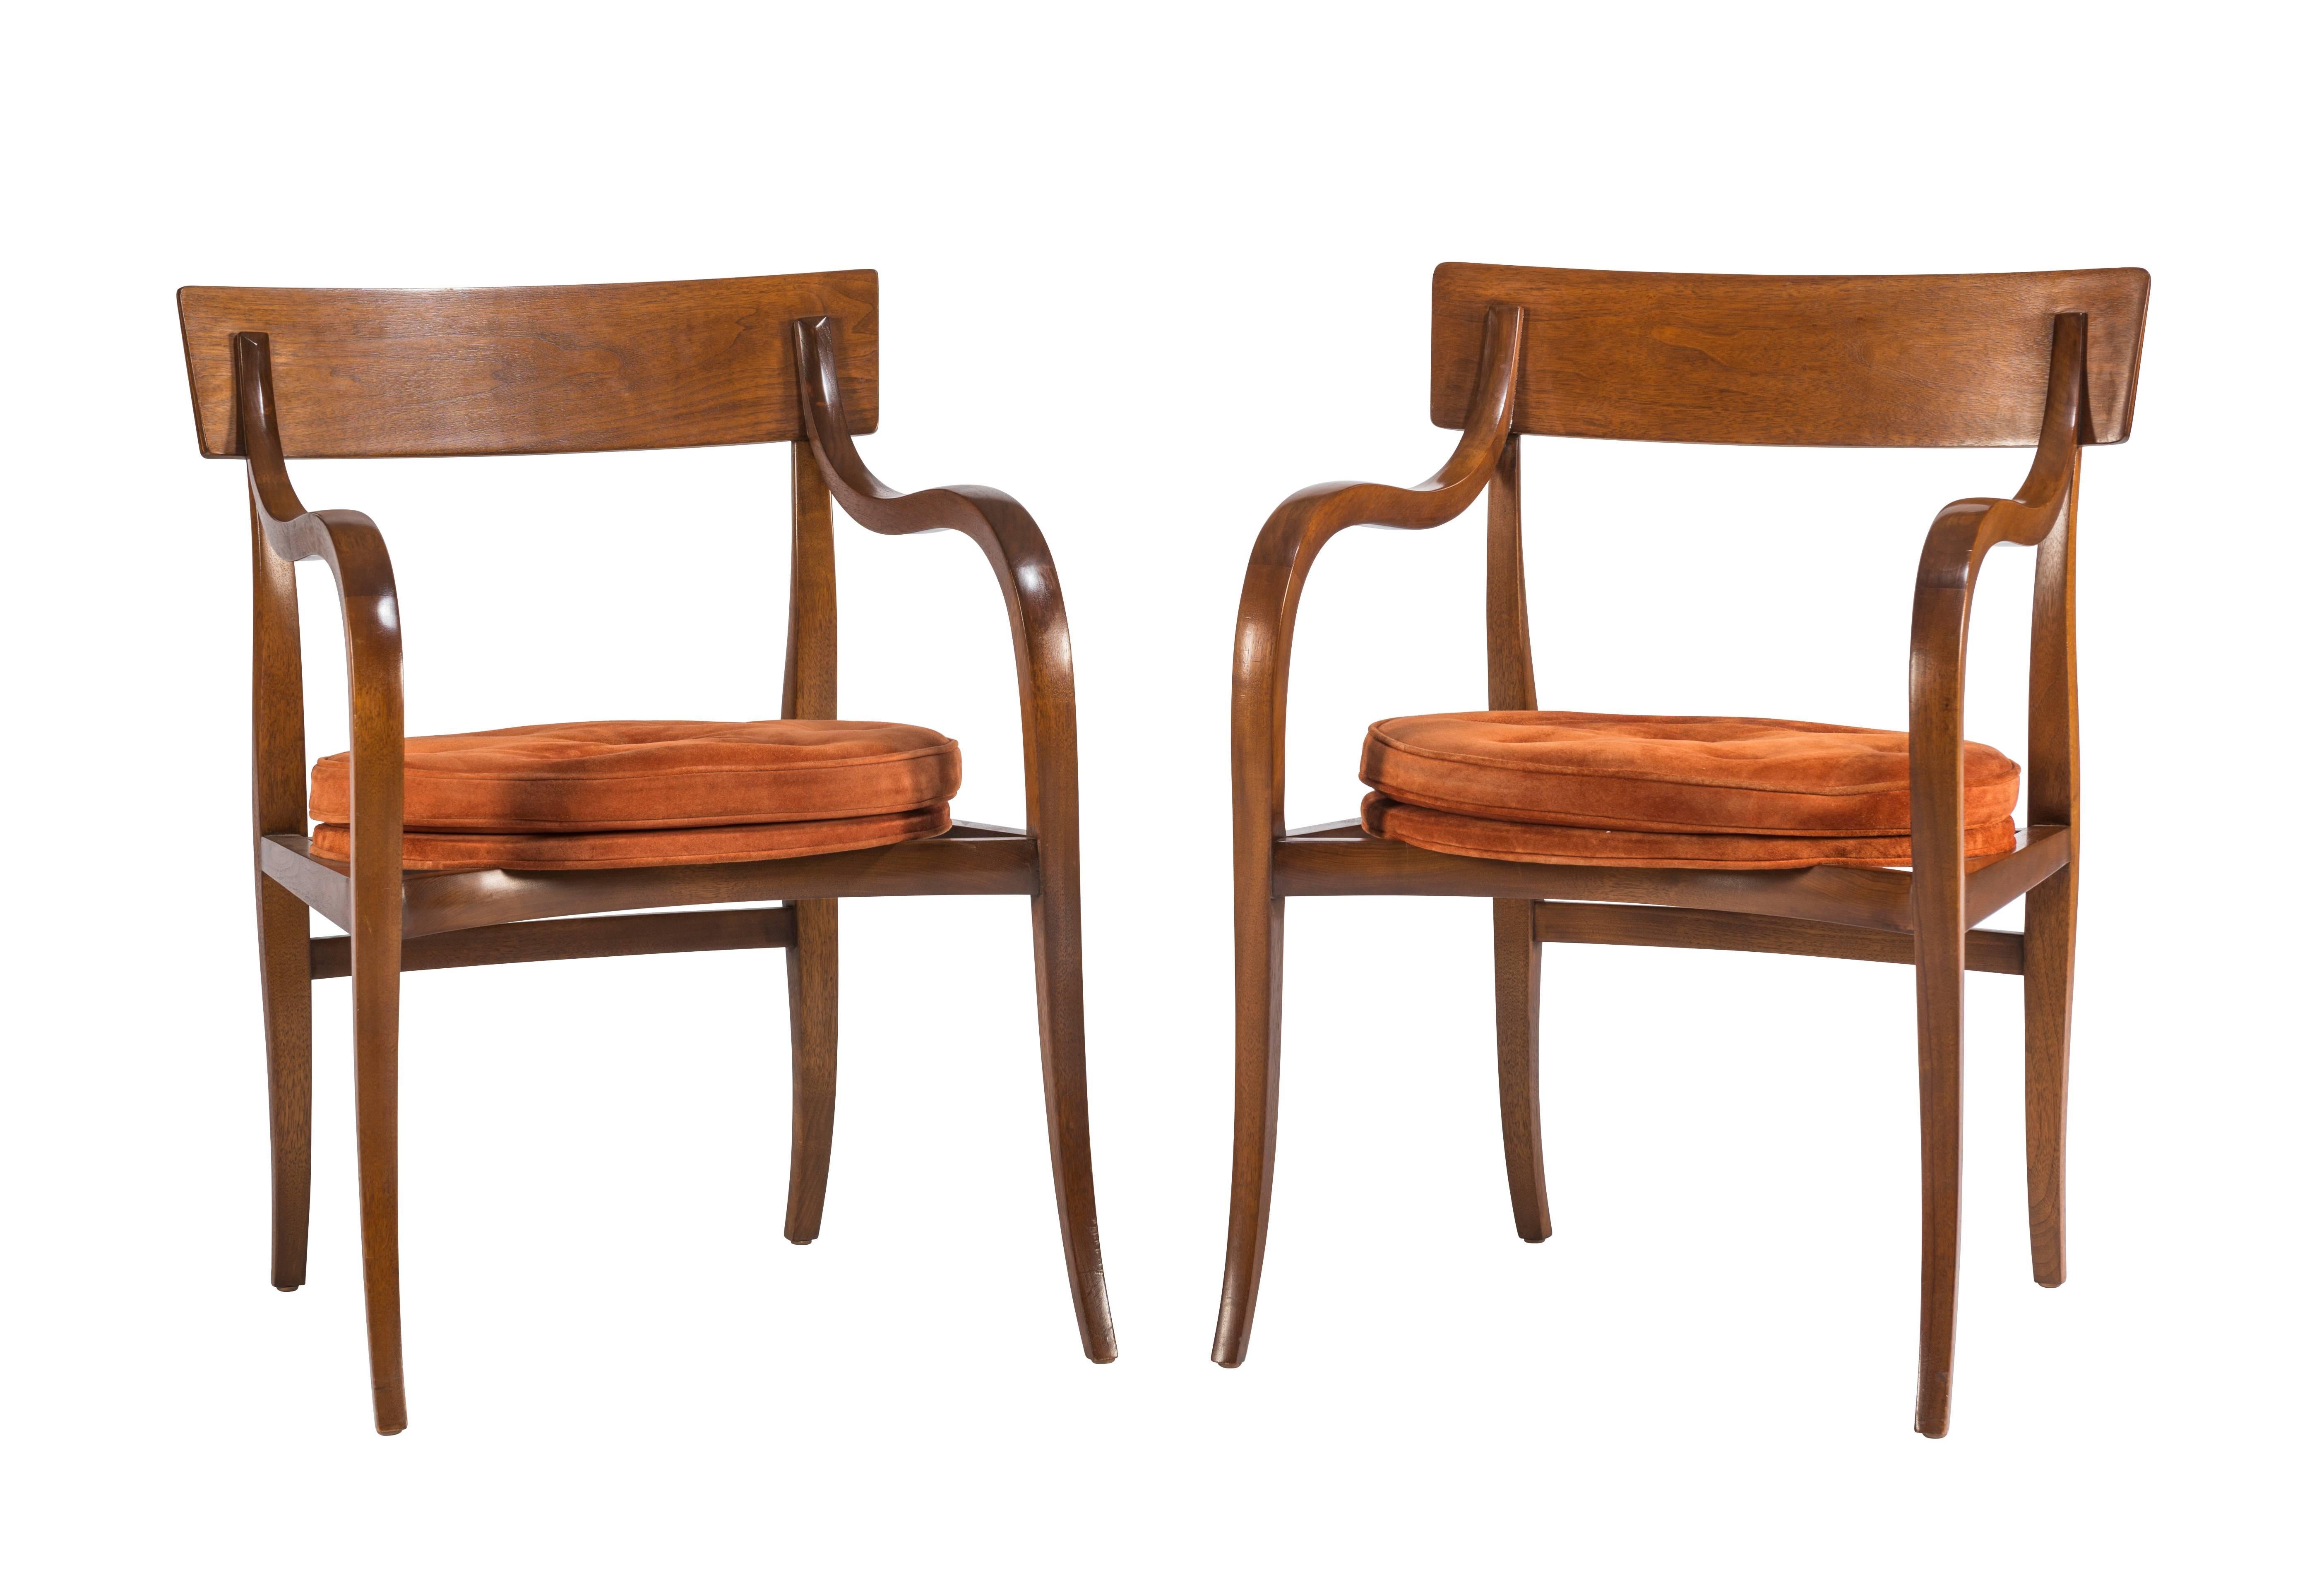 Pair of rare Dunbar Alexandria occasional chairs, model 6004, designed by Edward Wormley. One of the most sculptural and elegant chairs created by Wormley. Seats with original brown suede. Labeled.